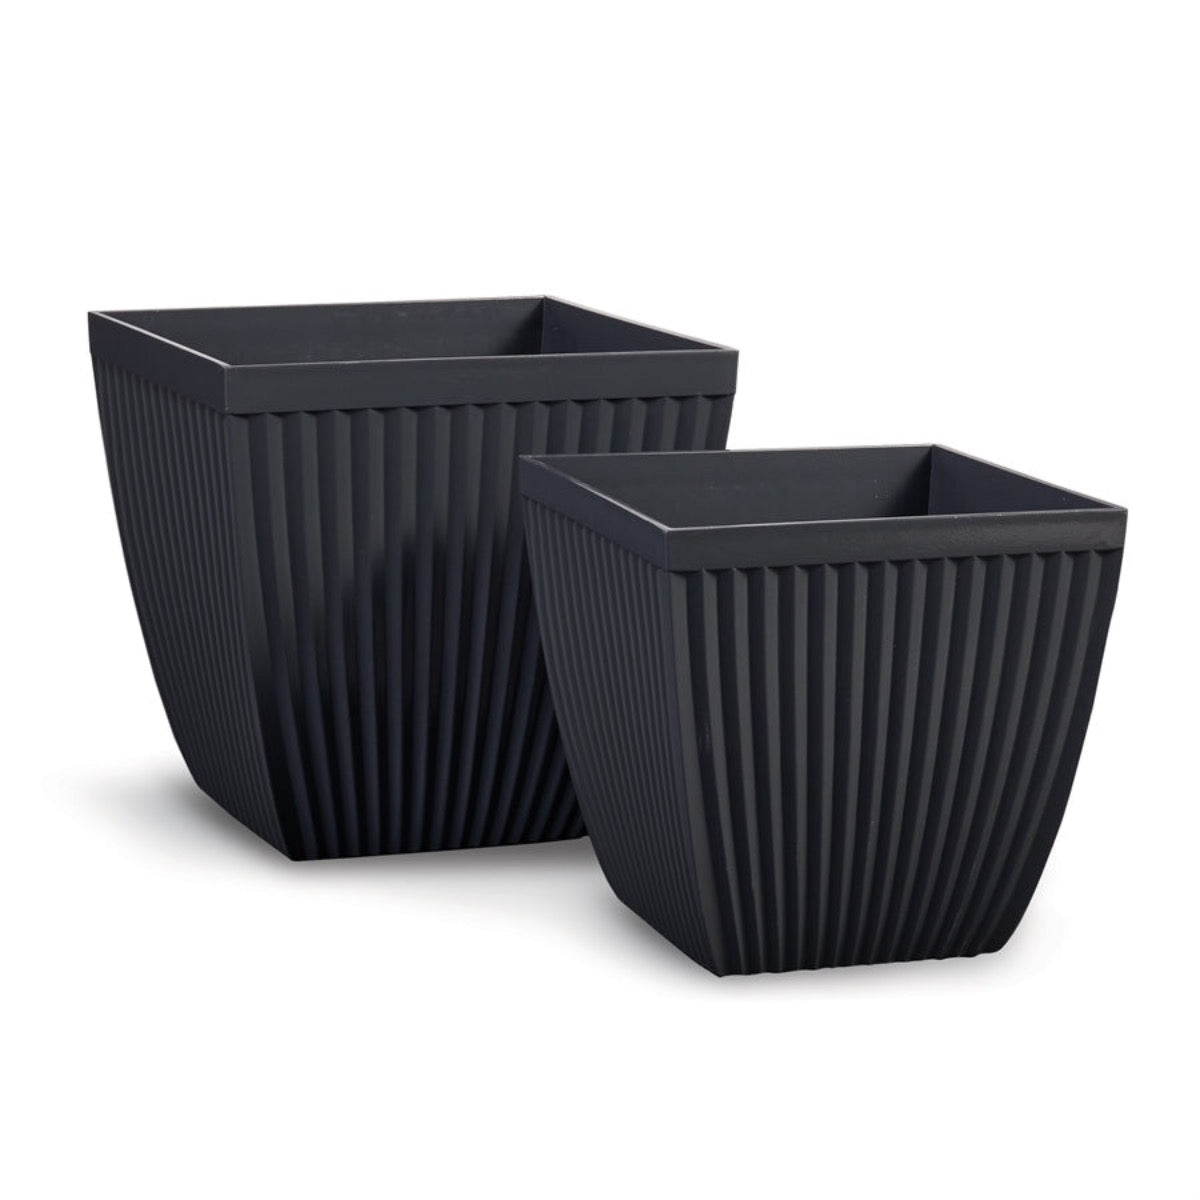 Glazelite Ribbed Square Outdoor Pots - Black. Front view.